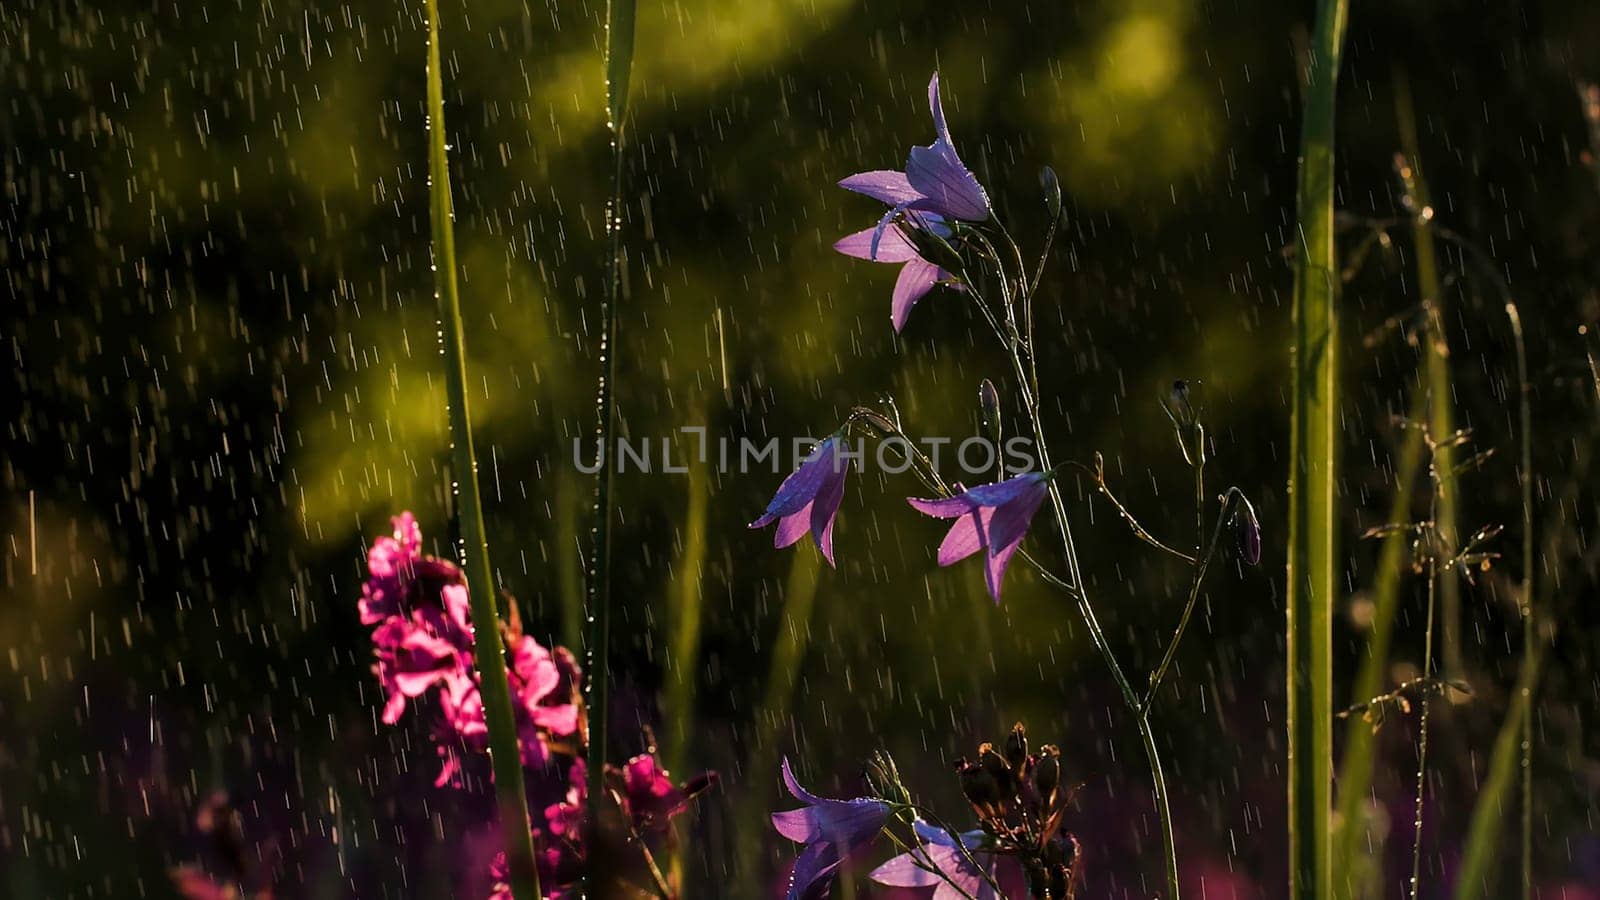 Bluebell flowers . Creative. Purple little flowers and green grass around in the rain by Mediawhalestock